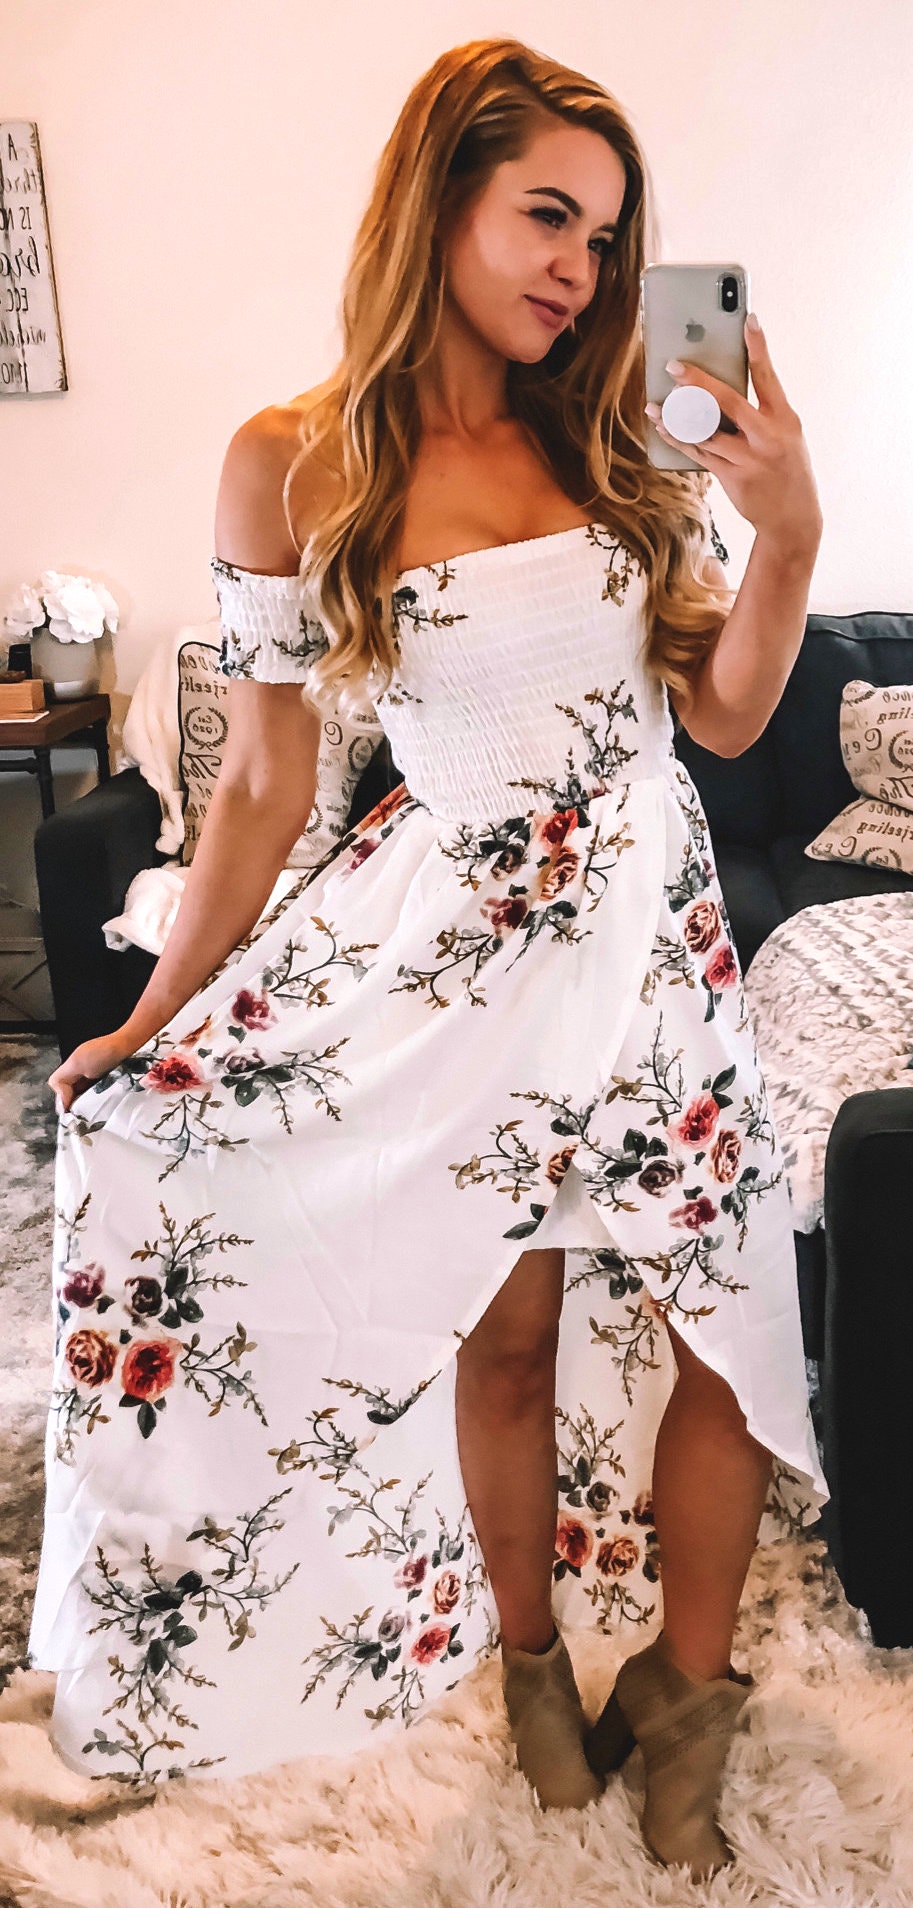 Cute white and red floral off-shoulder dress.